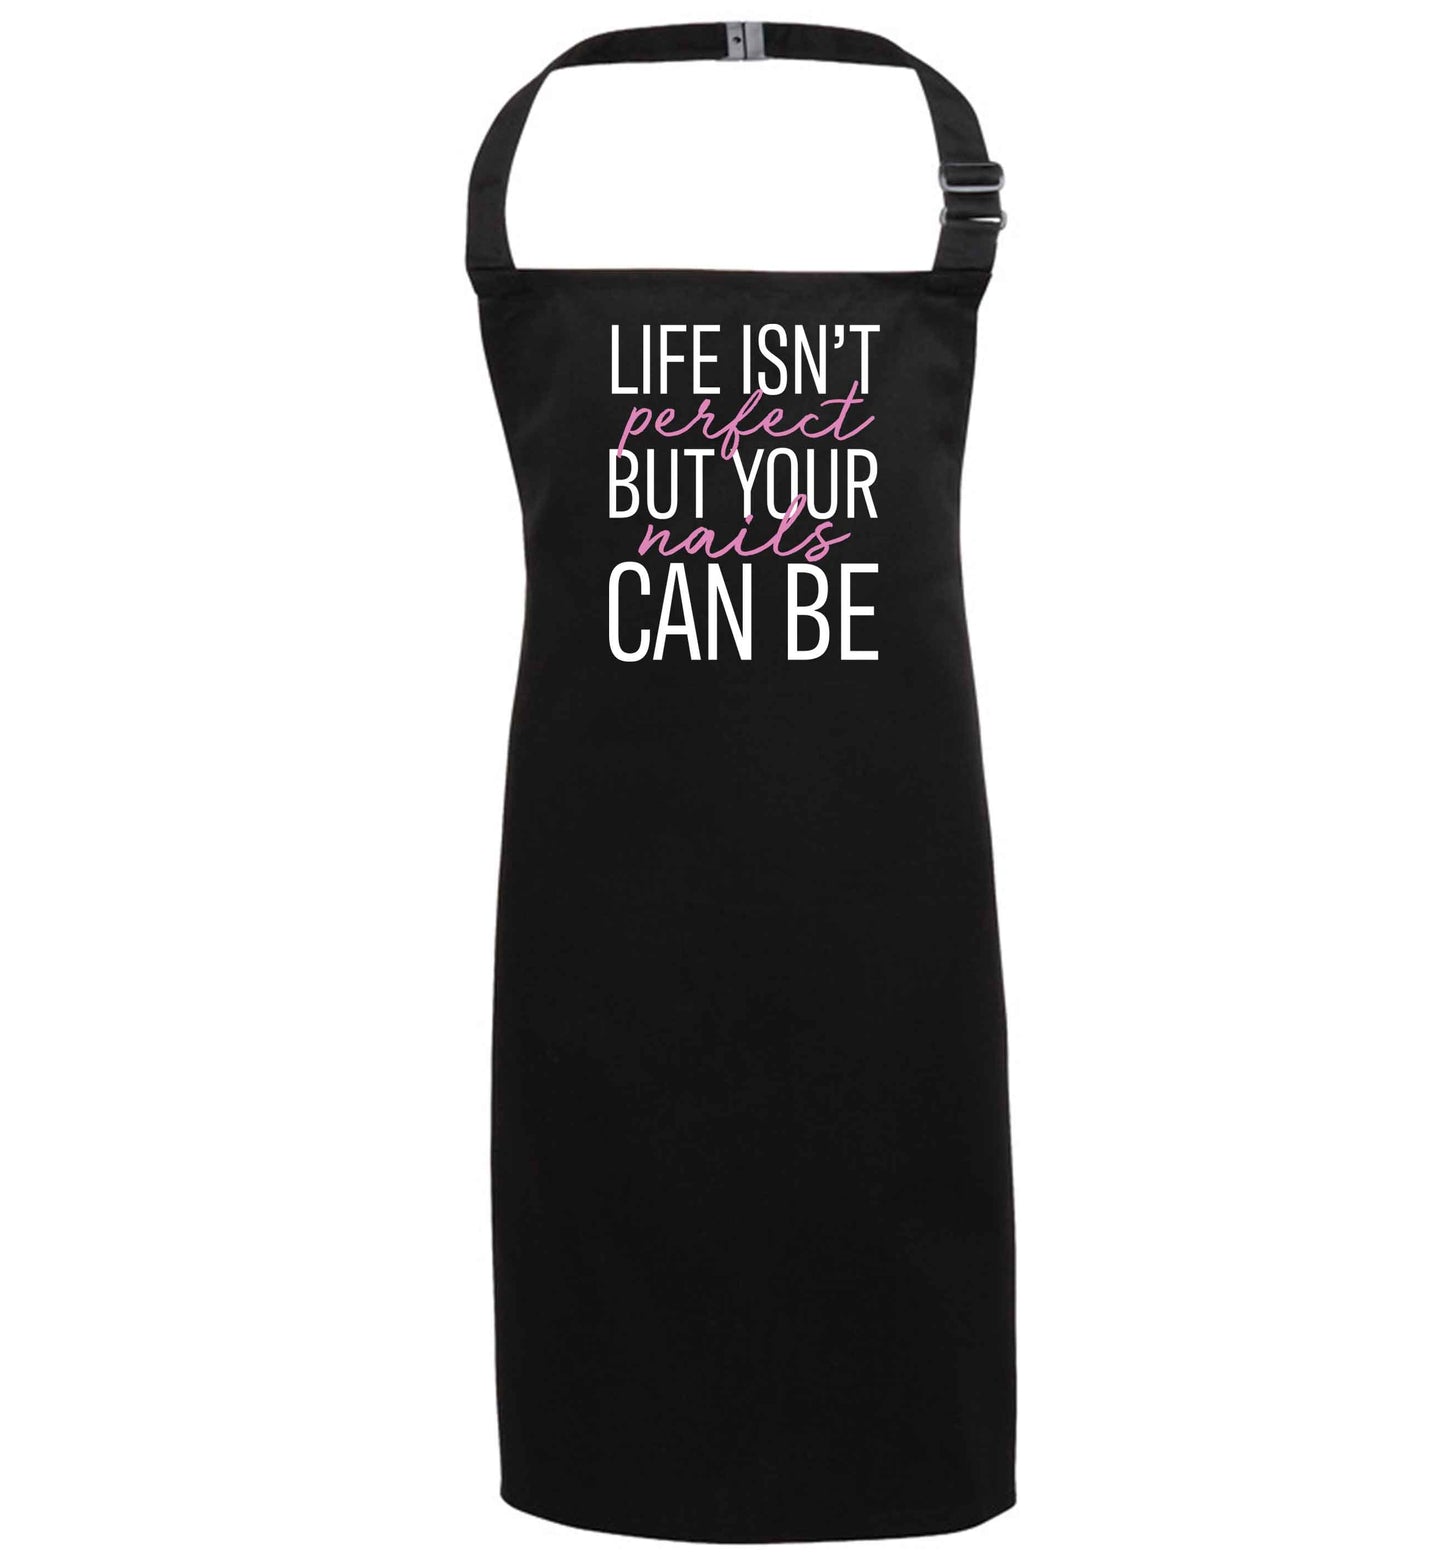 Life isn't perfect but your nails can be black apron 7-10 years